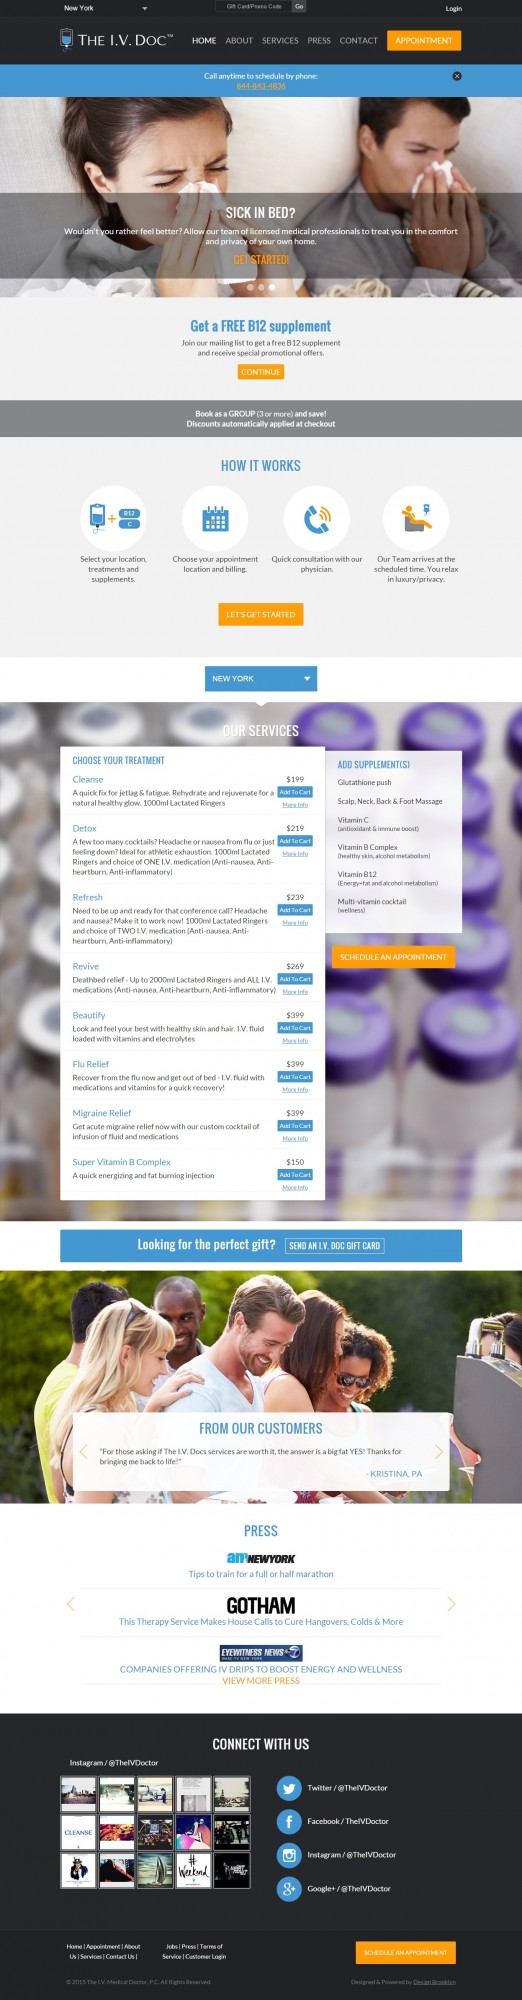 The IV Doc Homepage